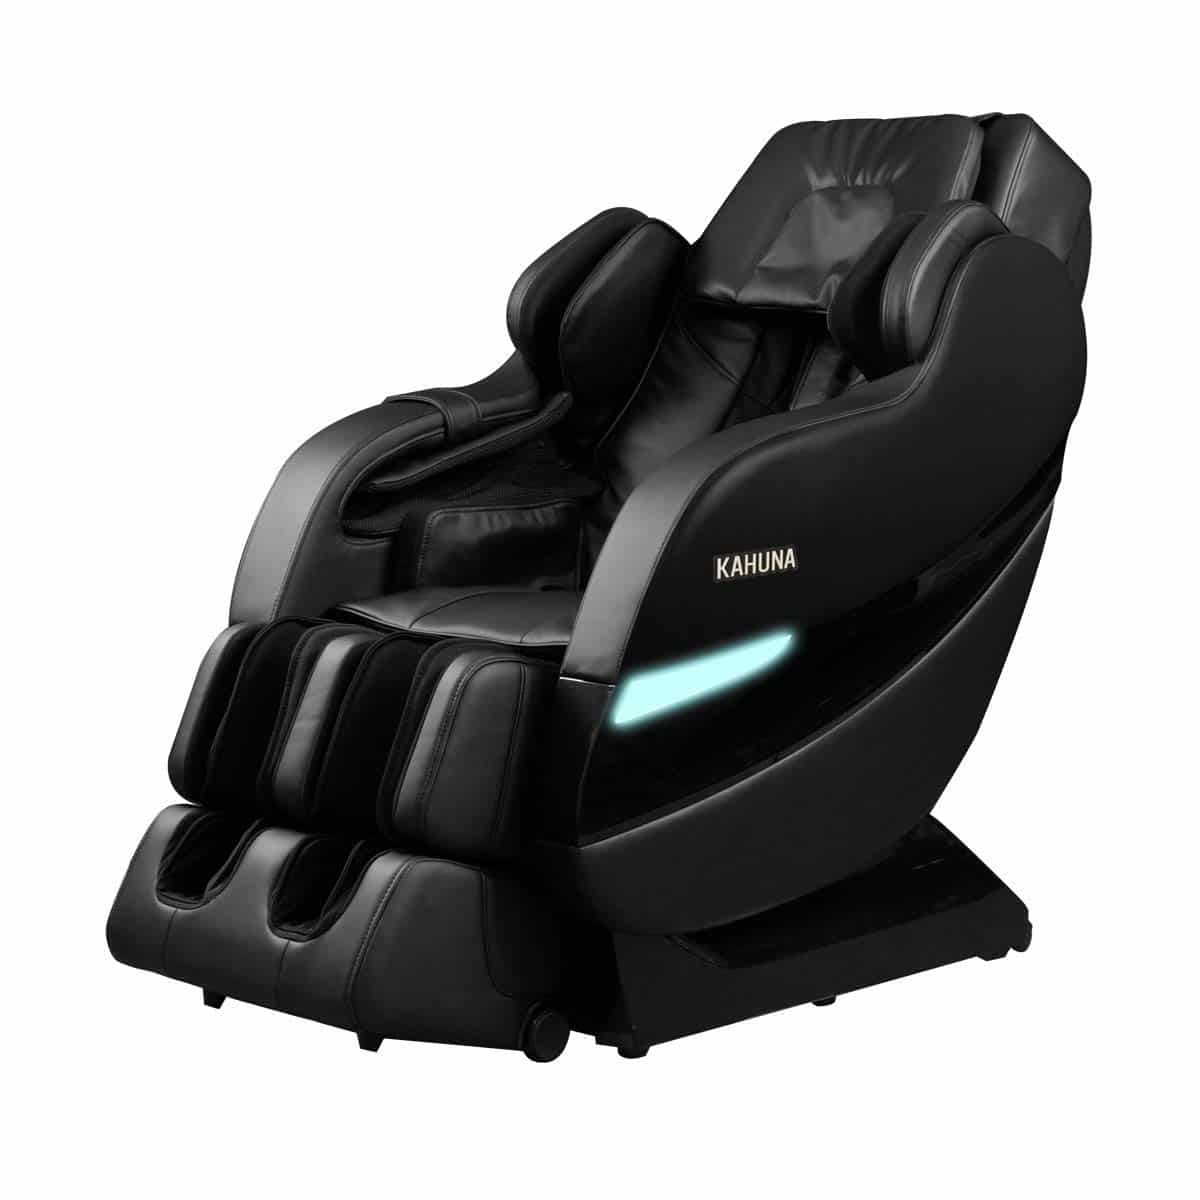 Top Performance Kahuna Superior Massage Chair with SL-Track 6 Rollers - SM-7300 (Black)